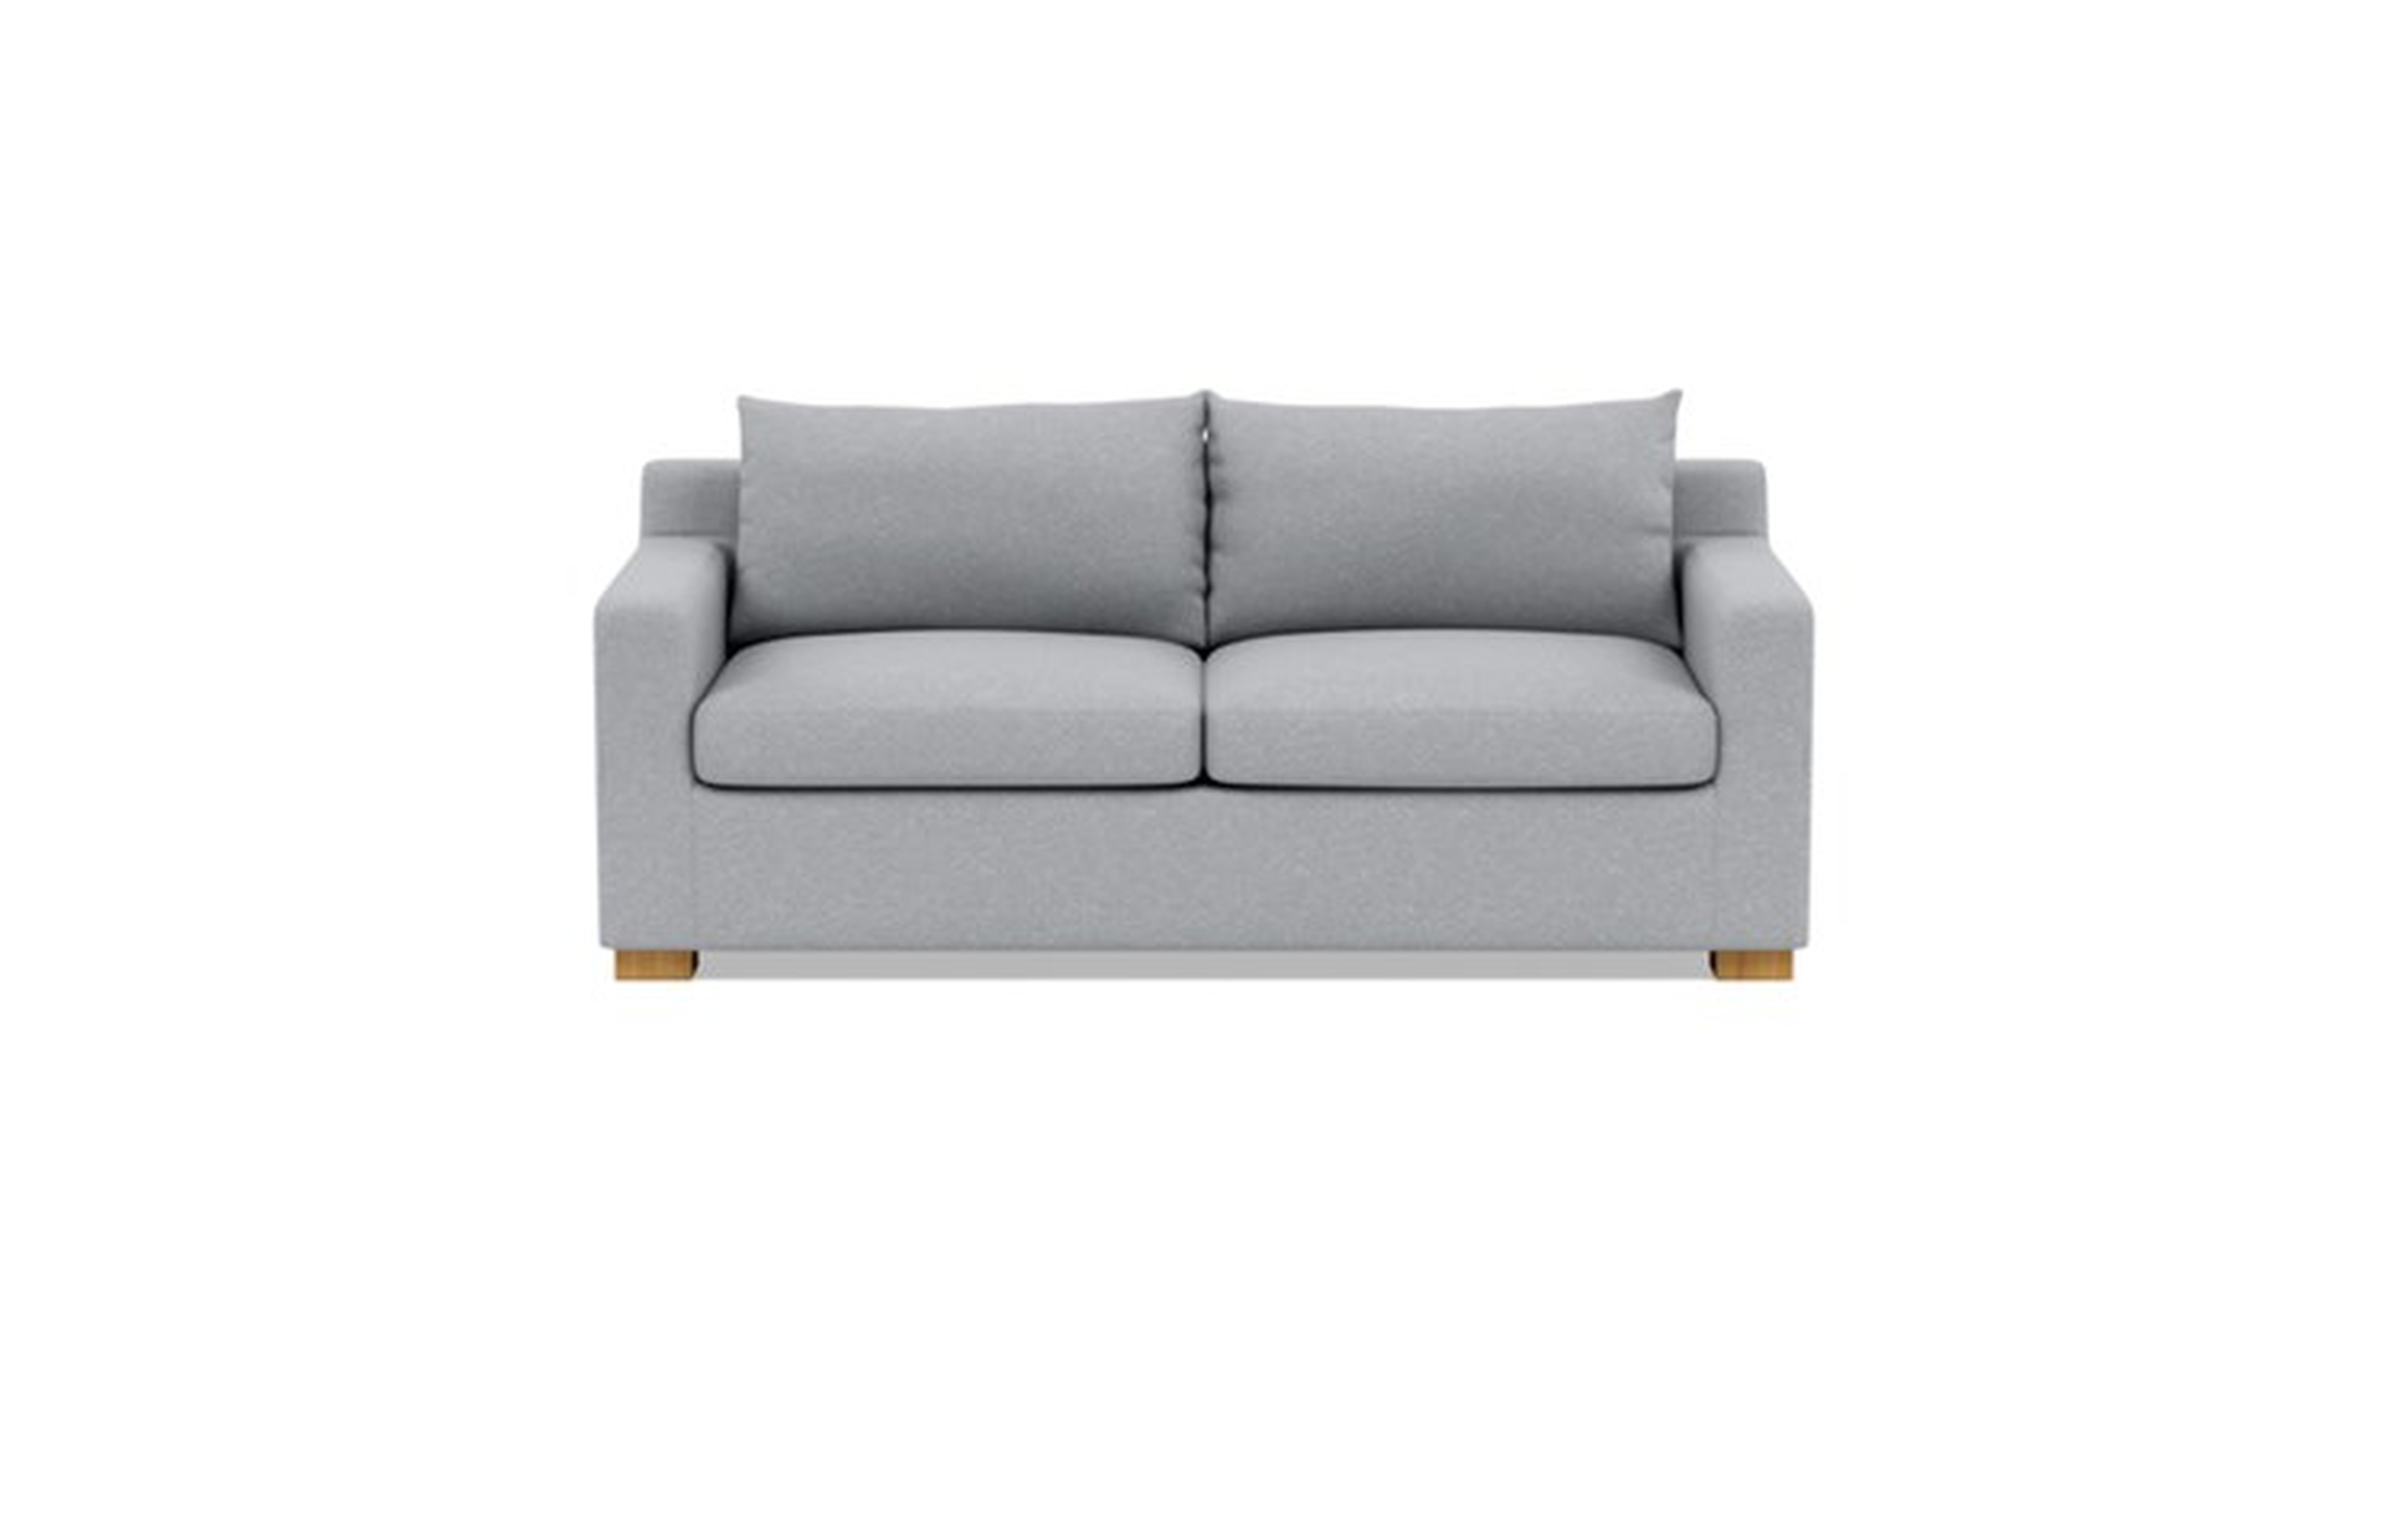 Sloan Sleeper Sleeper Sofa with Grey Gris Fabric, double down blend cushions, and Natural Oak legs - Interior Define